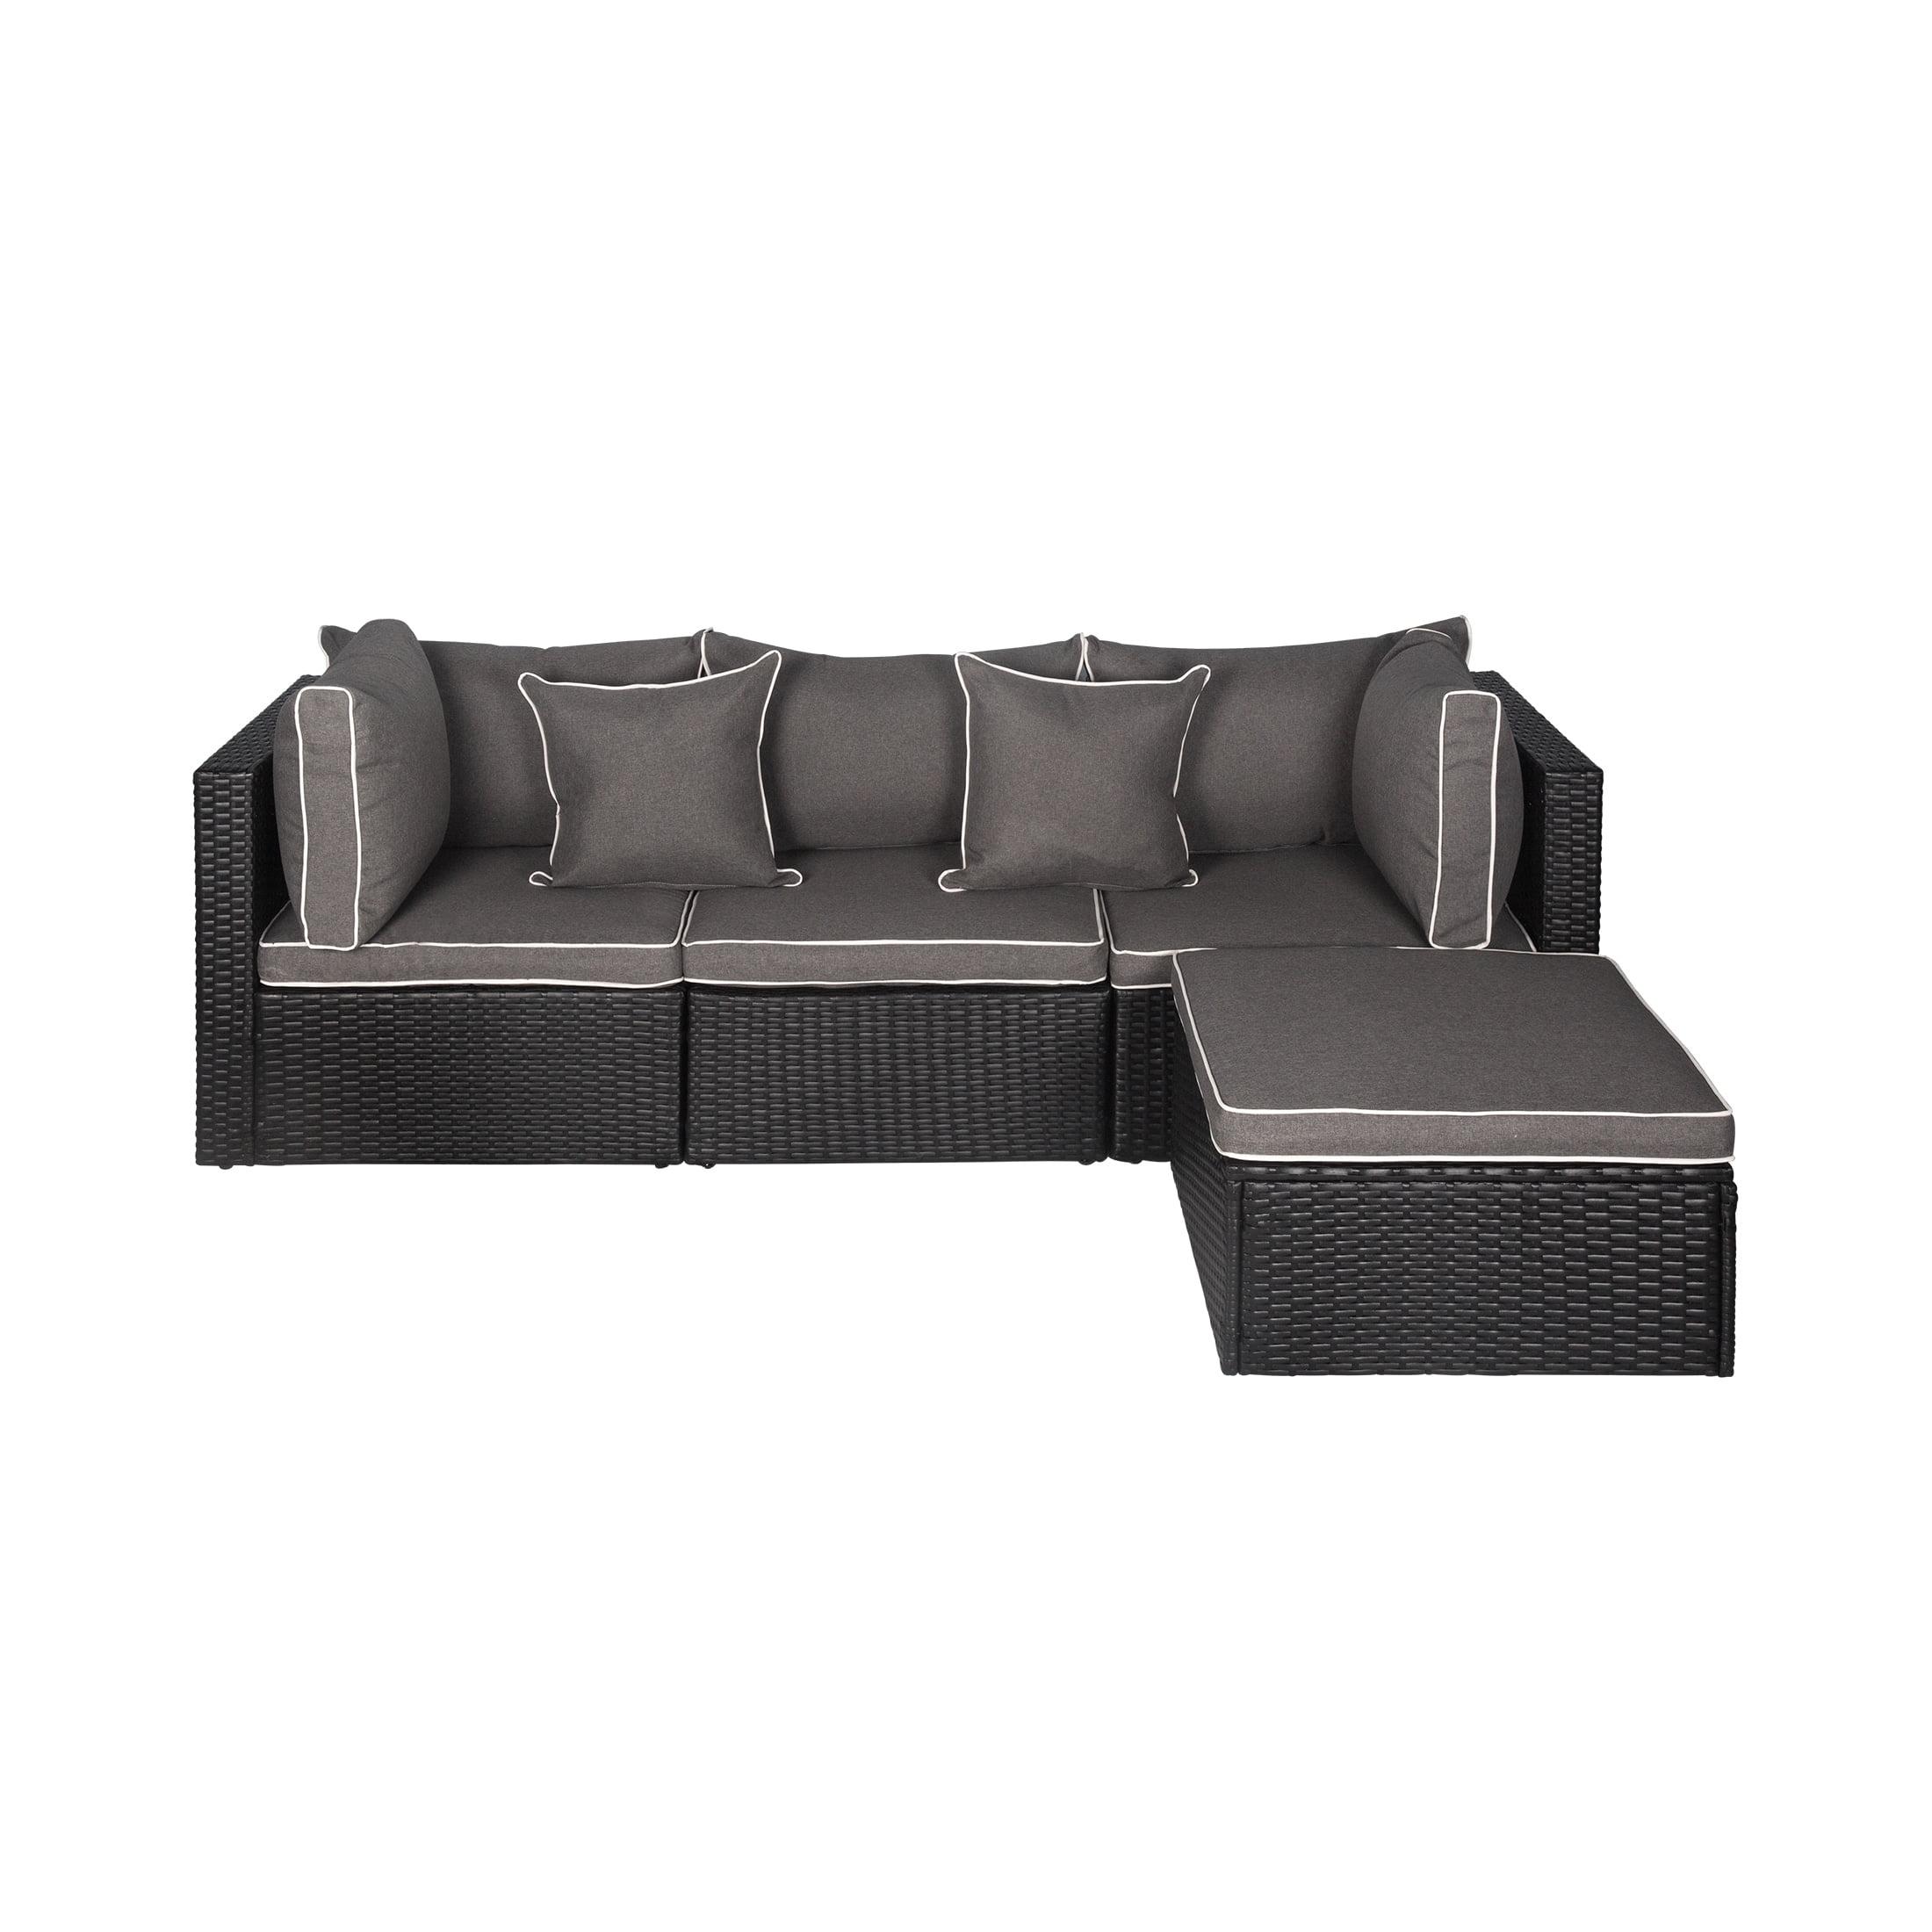 Contemporary 5-Seat Wicker Sectional Sofa Set in Black/Gray